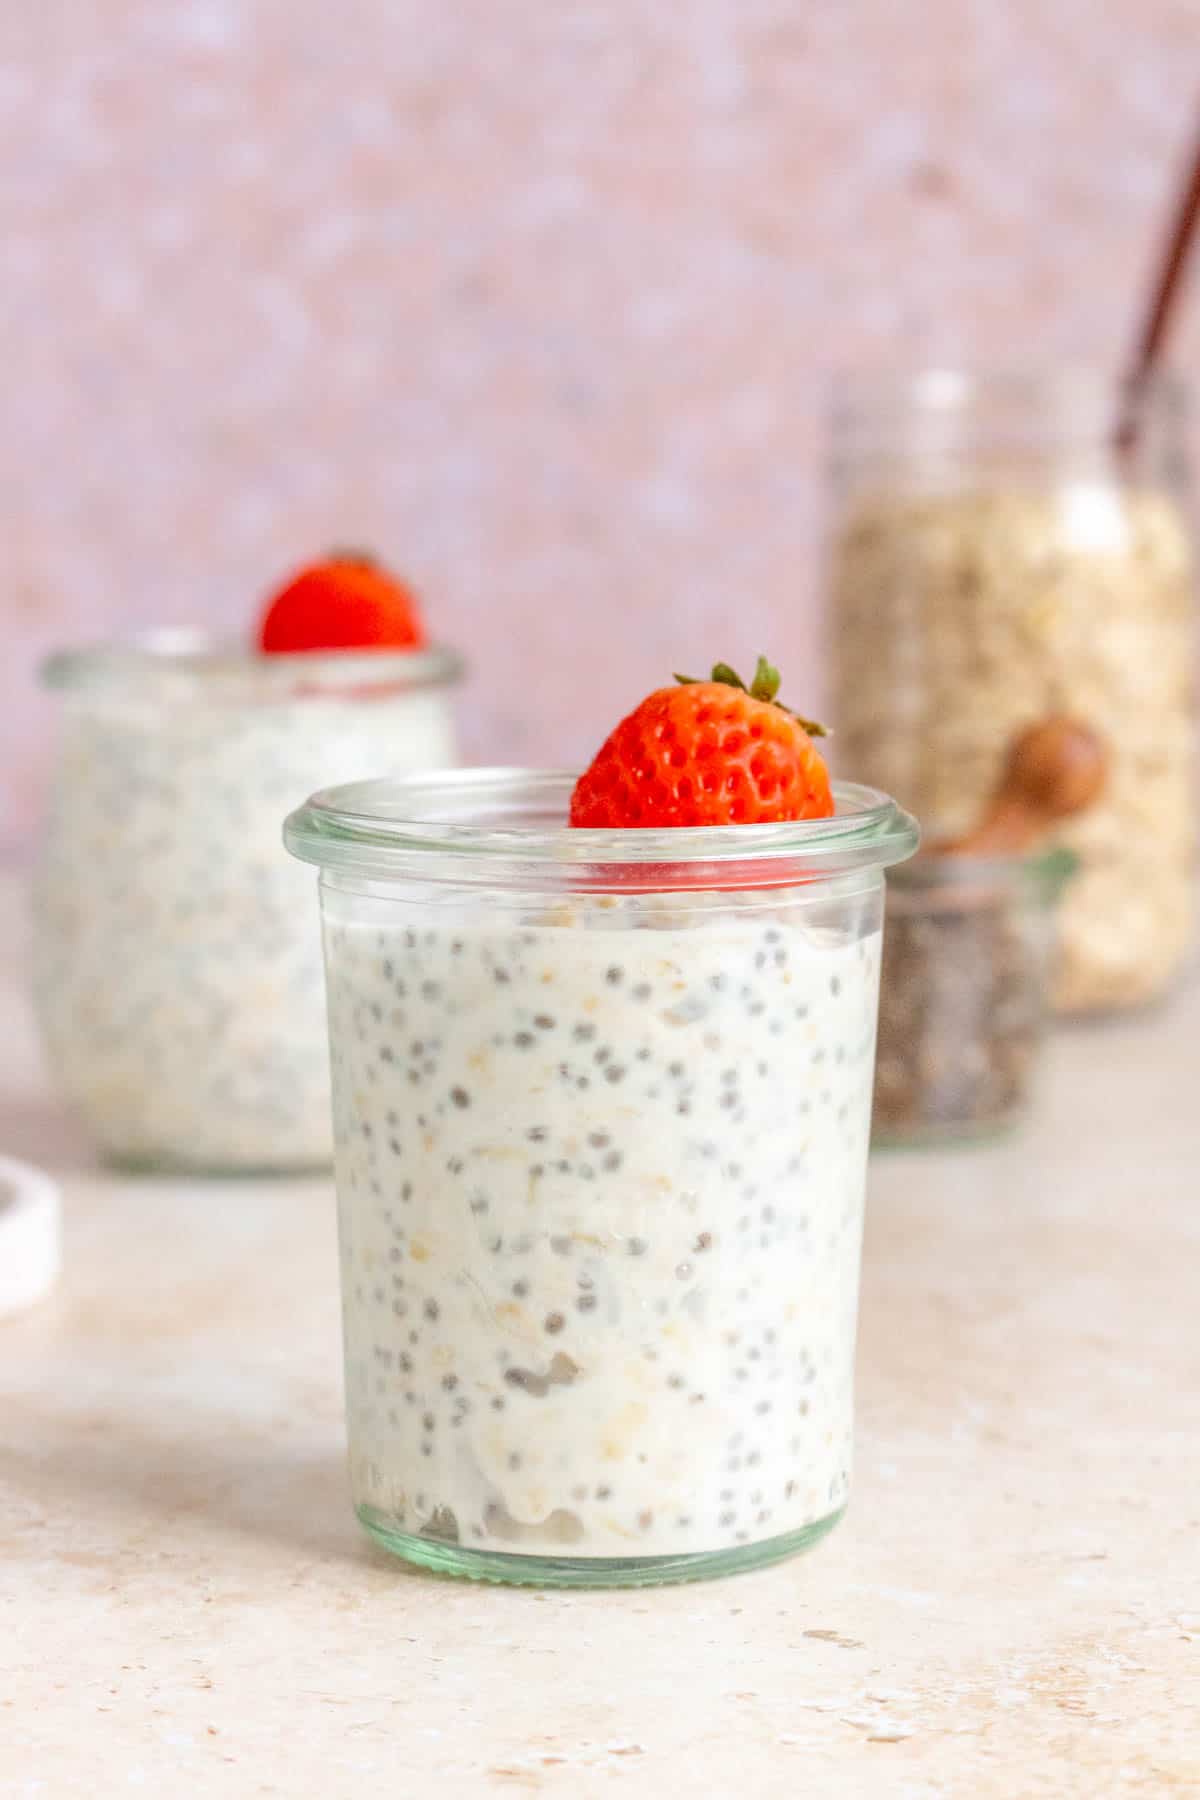 A jar of kefir overnight oats with a strawberry on top with another jar in the background out of focus along with a jar of chia seeds and rolled oats.